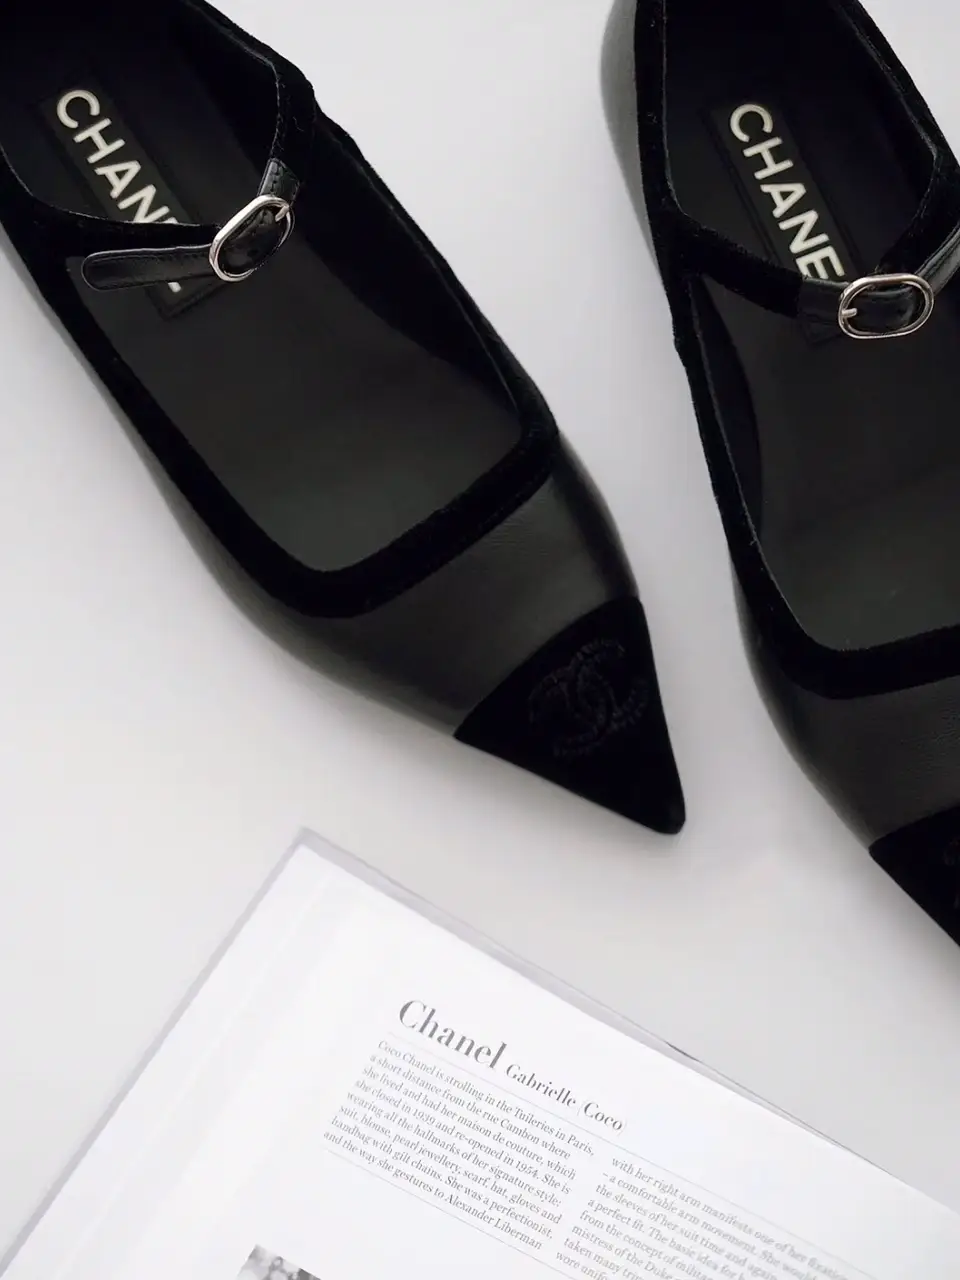 Rating Chanel Shoes series pt 4 #chanel #quiltedchanel